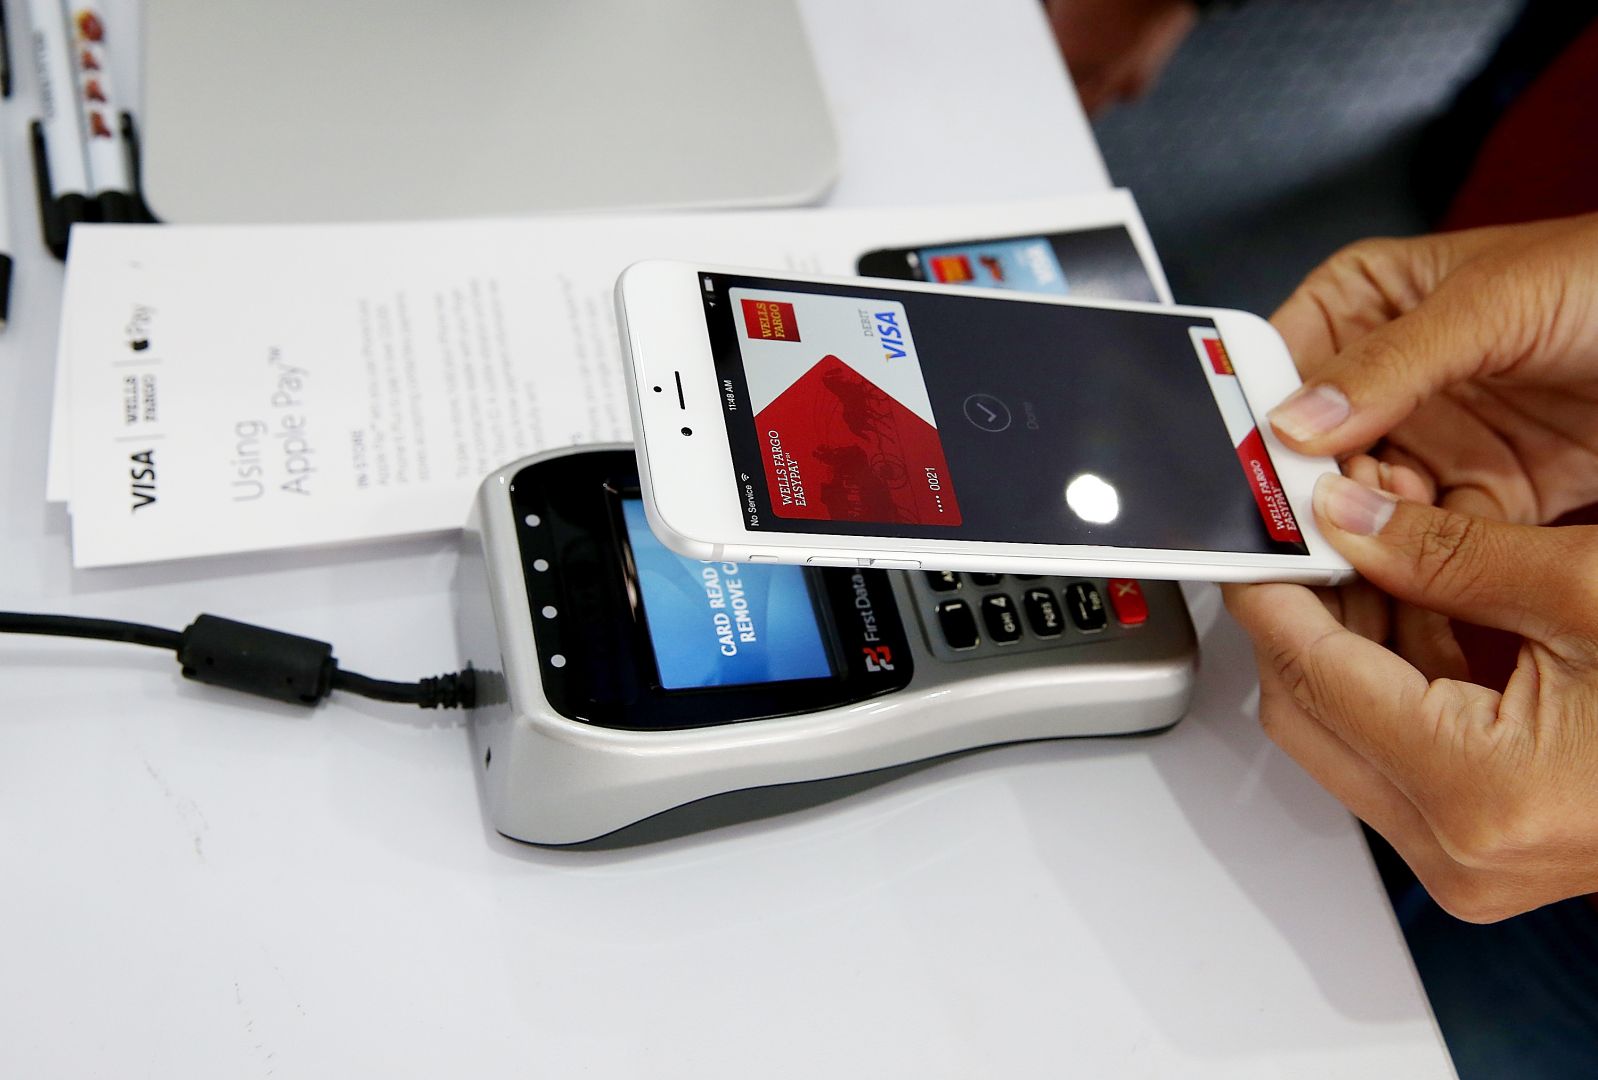 Nearly One Year After Launch, Apple Pay Finds Limited Traction In China